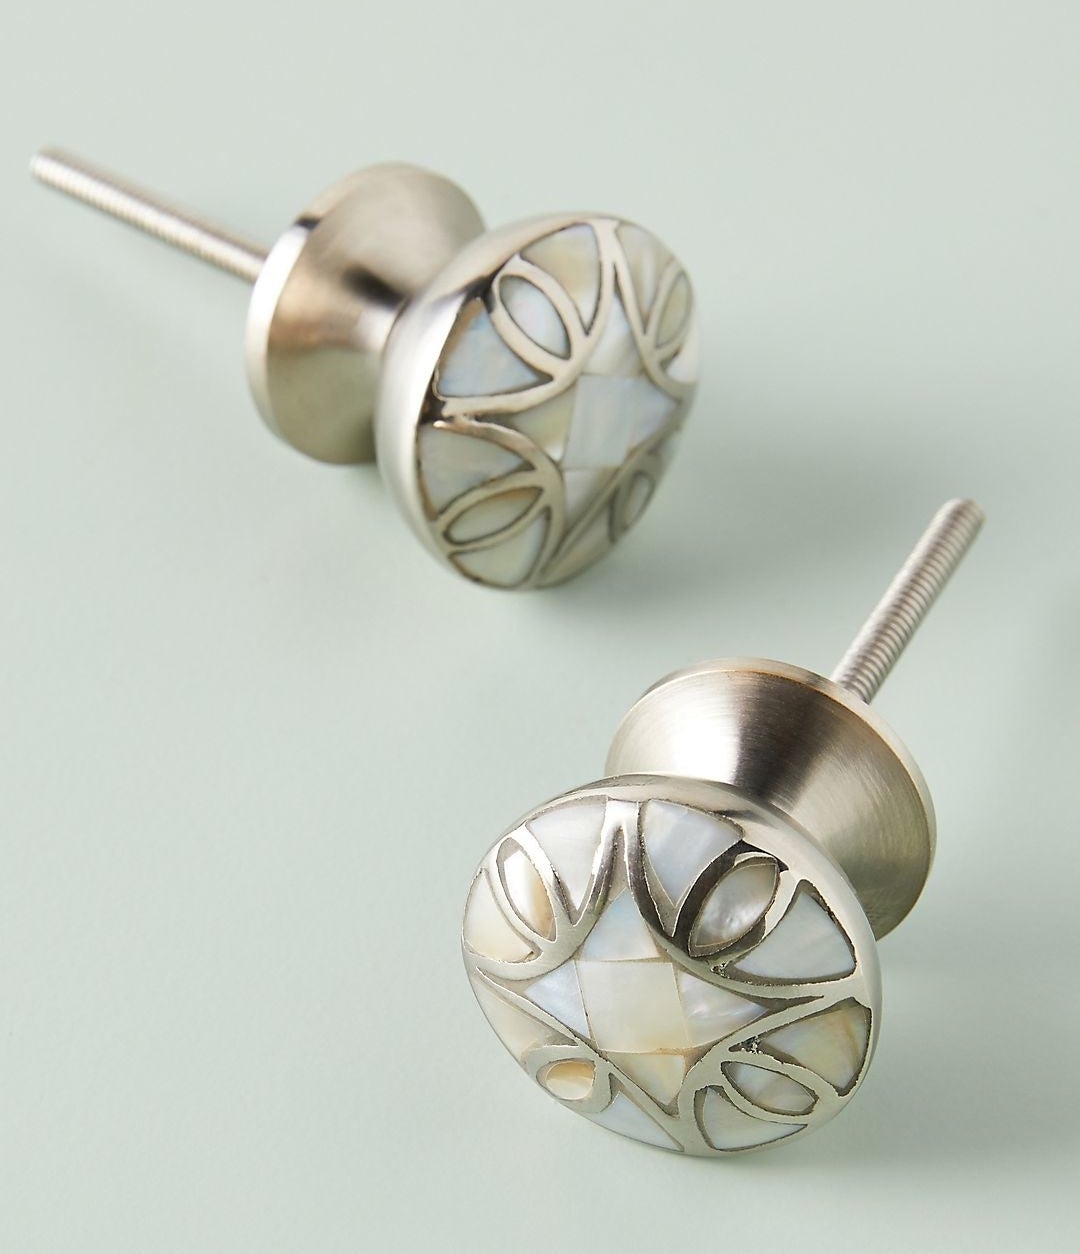 the silver-looking knobs with a mother of pearl design